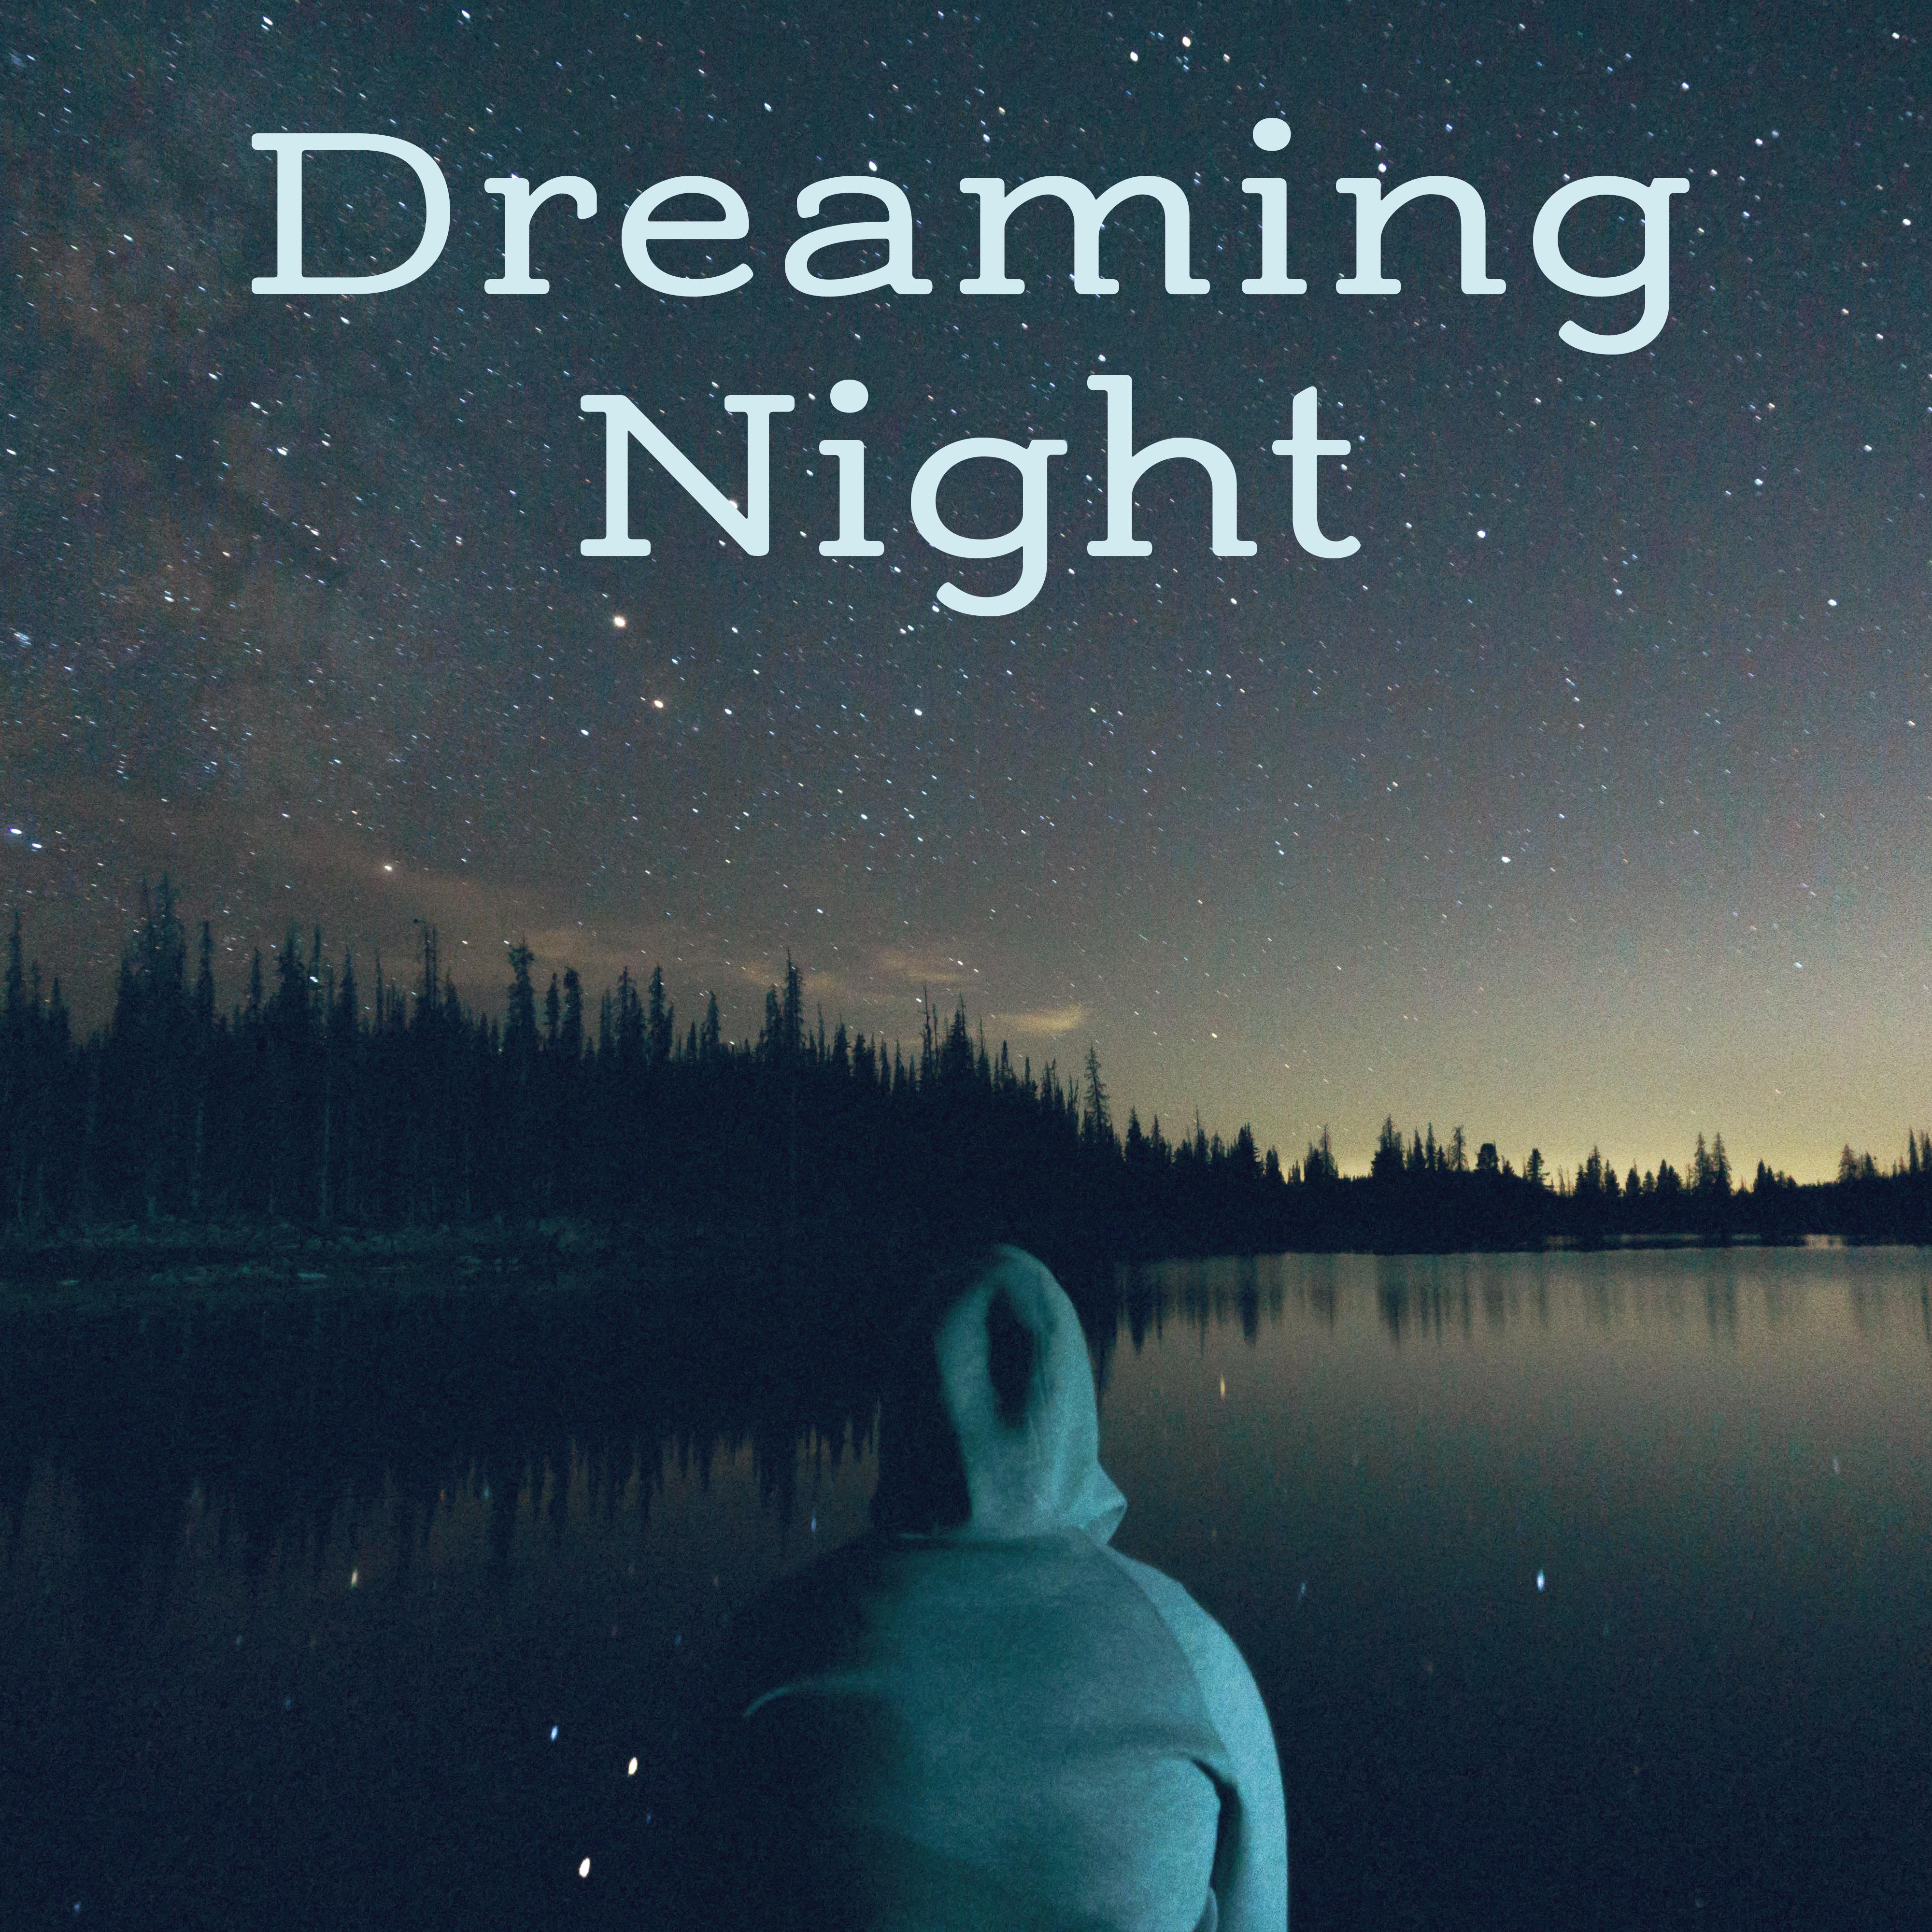 Dreaming Night  Soothing Sounds for Sleep, Bedtime, Deep Dreams, Calm Night, Restful Sleep, Nature Sounds to Calm Down, Relaxing Music at Night